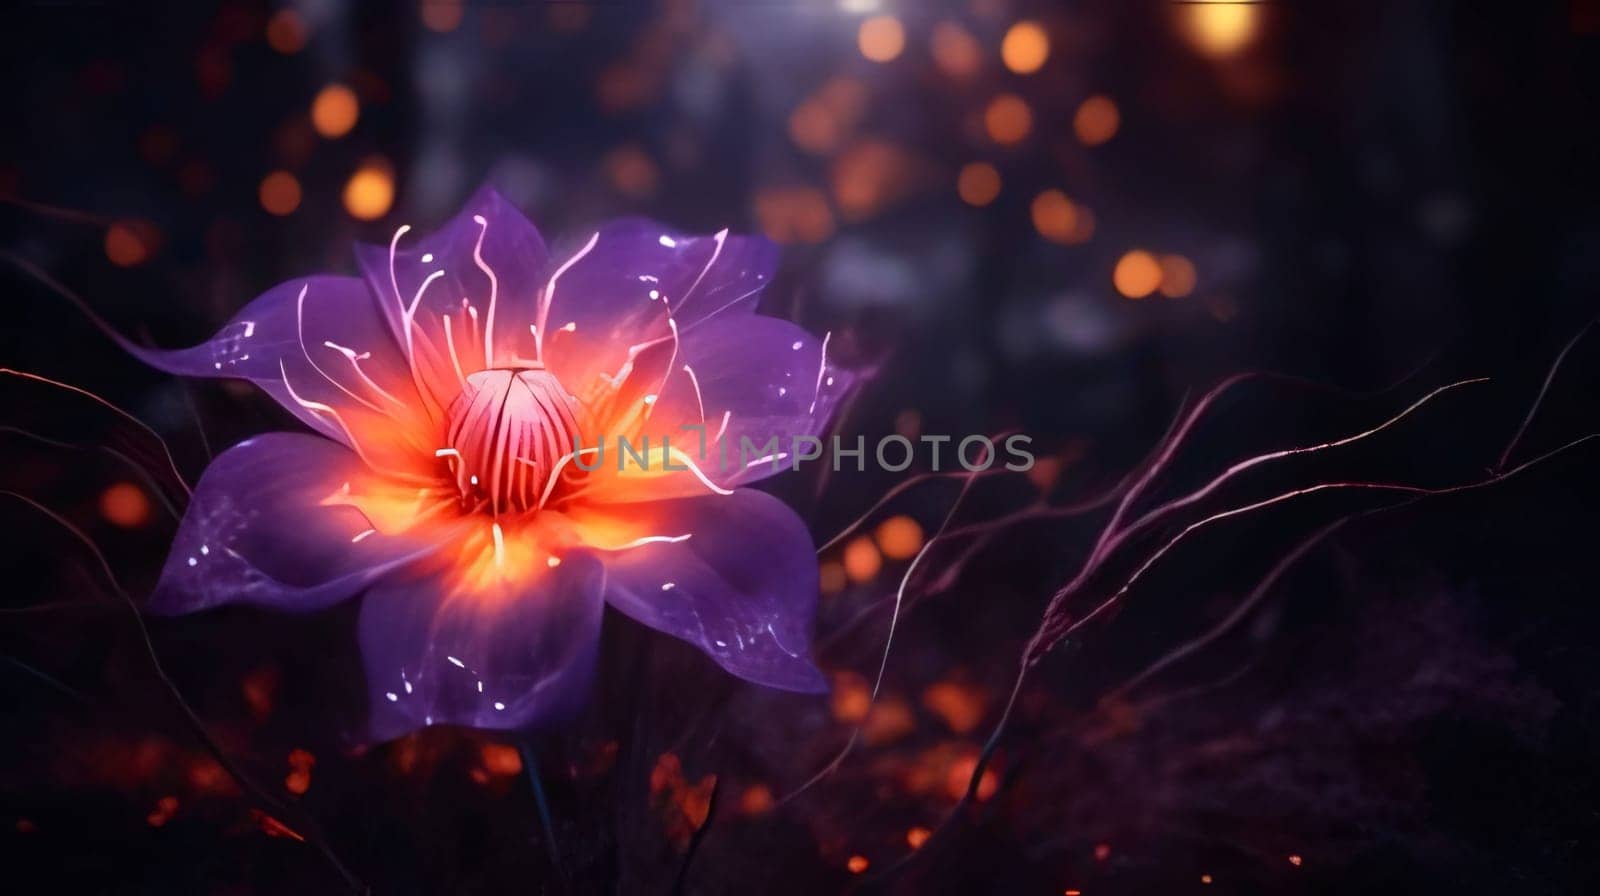 Abstract navy blue and orange large flower with petals on a dark background. Flowering flowers, a symbol of spring, new life. A joyful time of nature waking up to life.